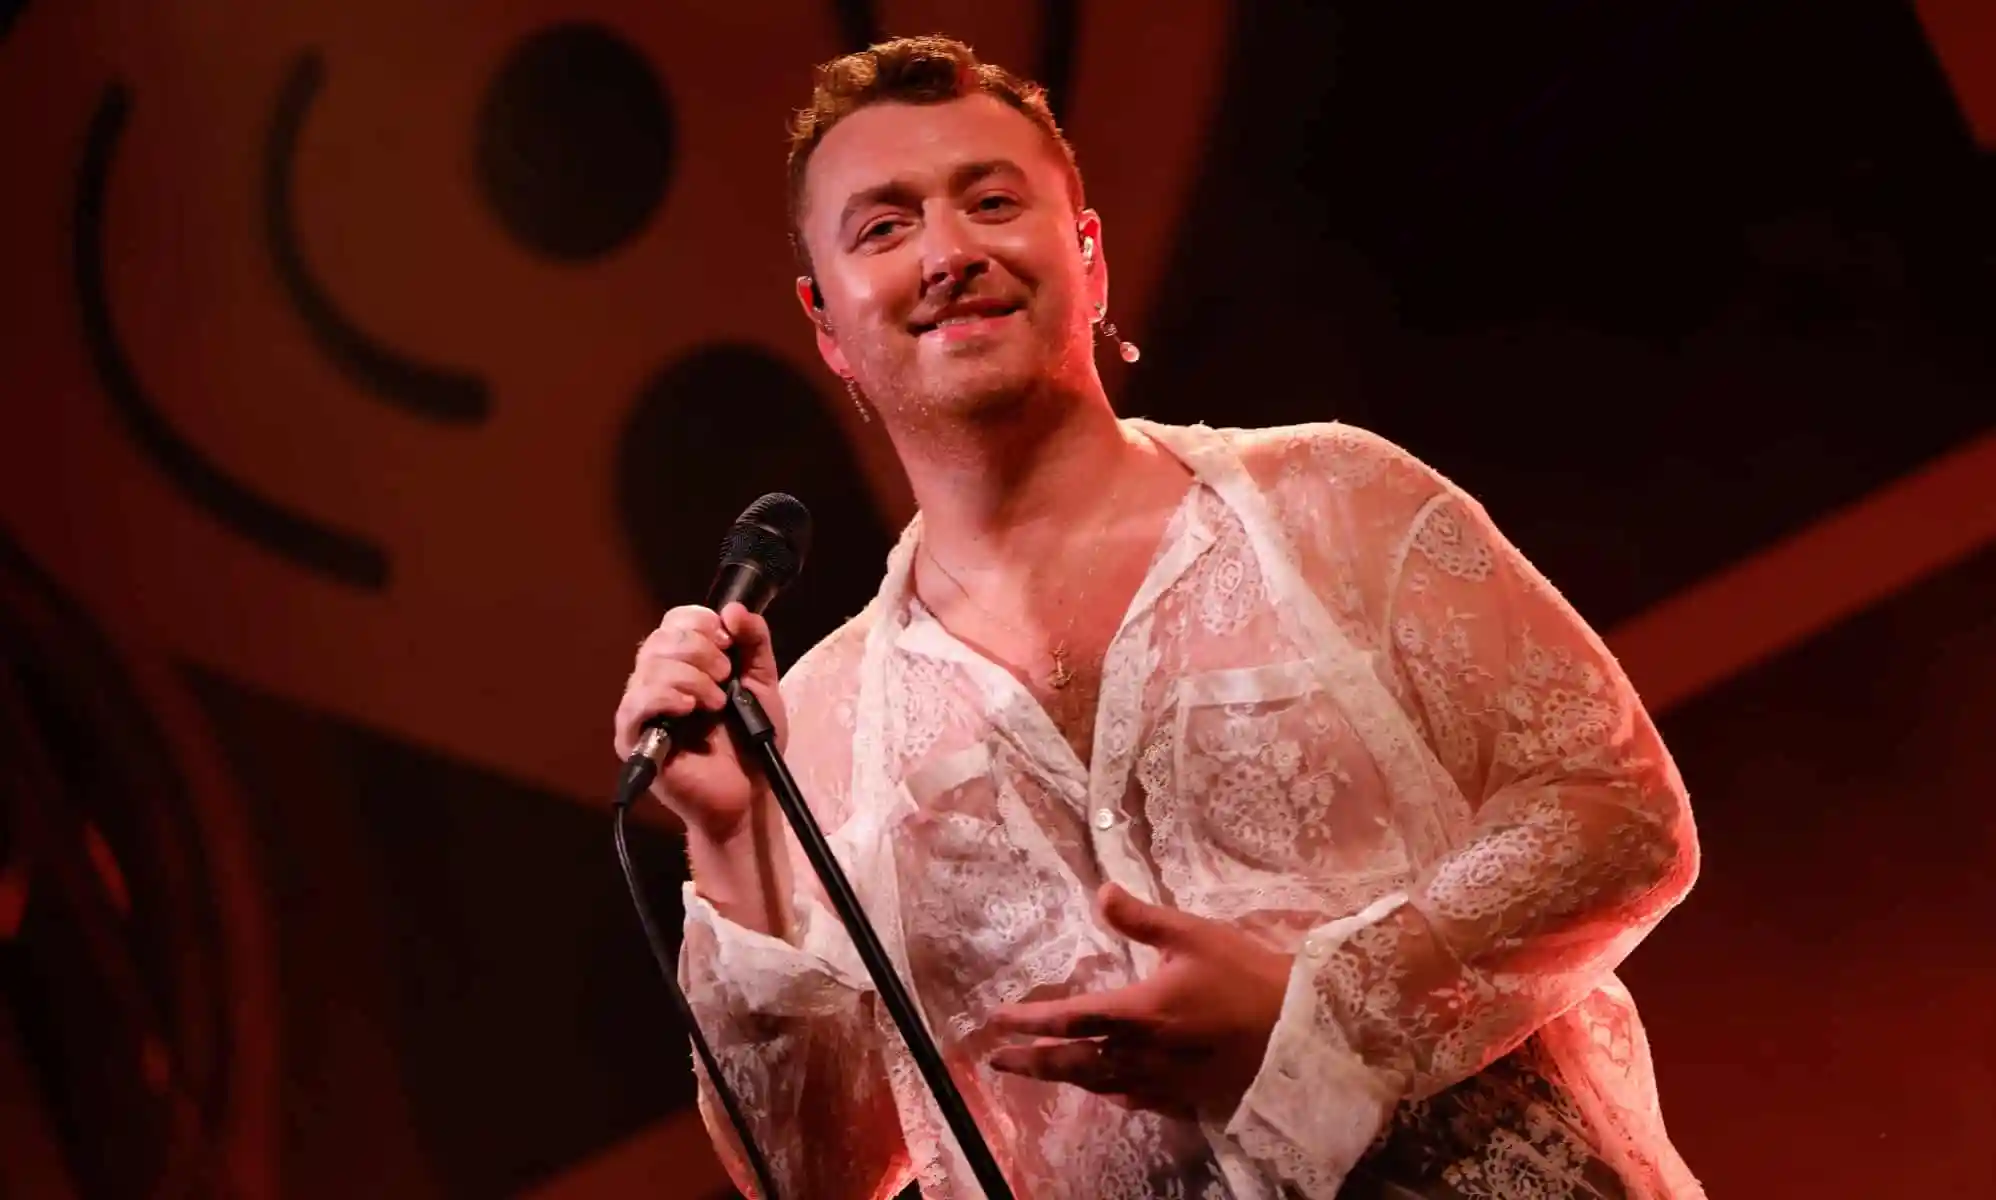 Sam Smith reflects on ‘feeling like a woman dressing up in male clothing’